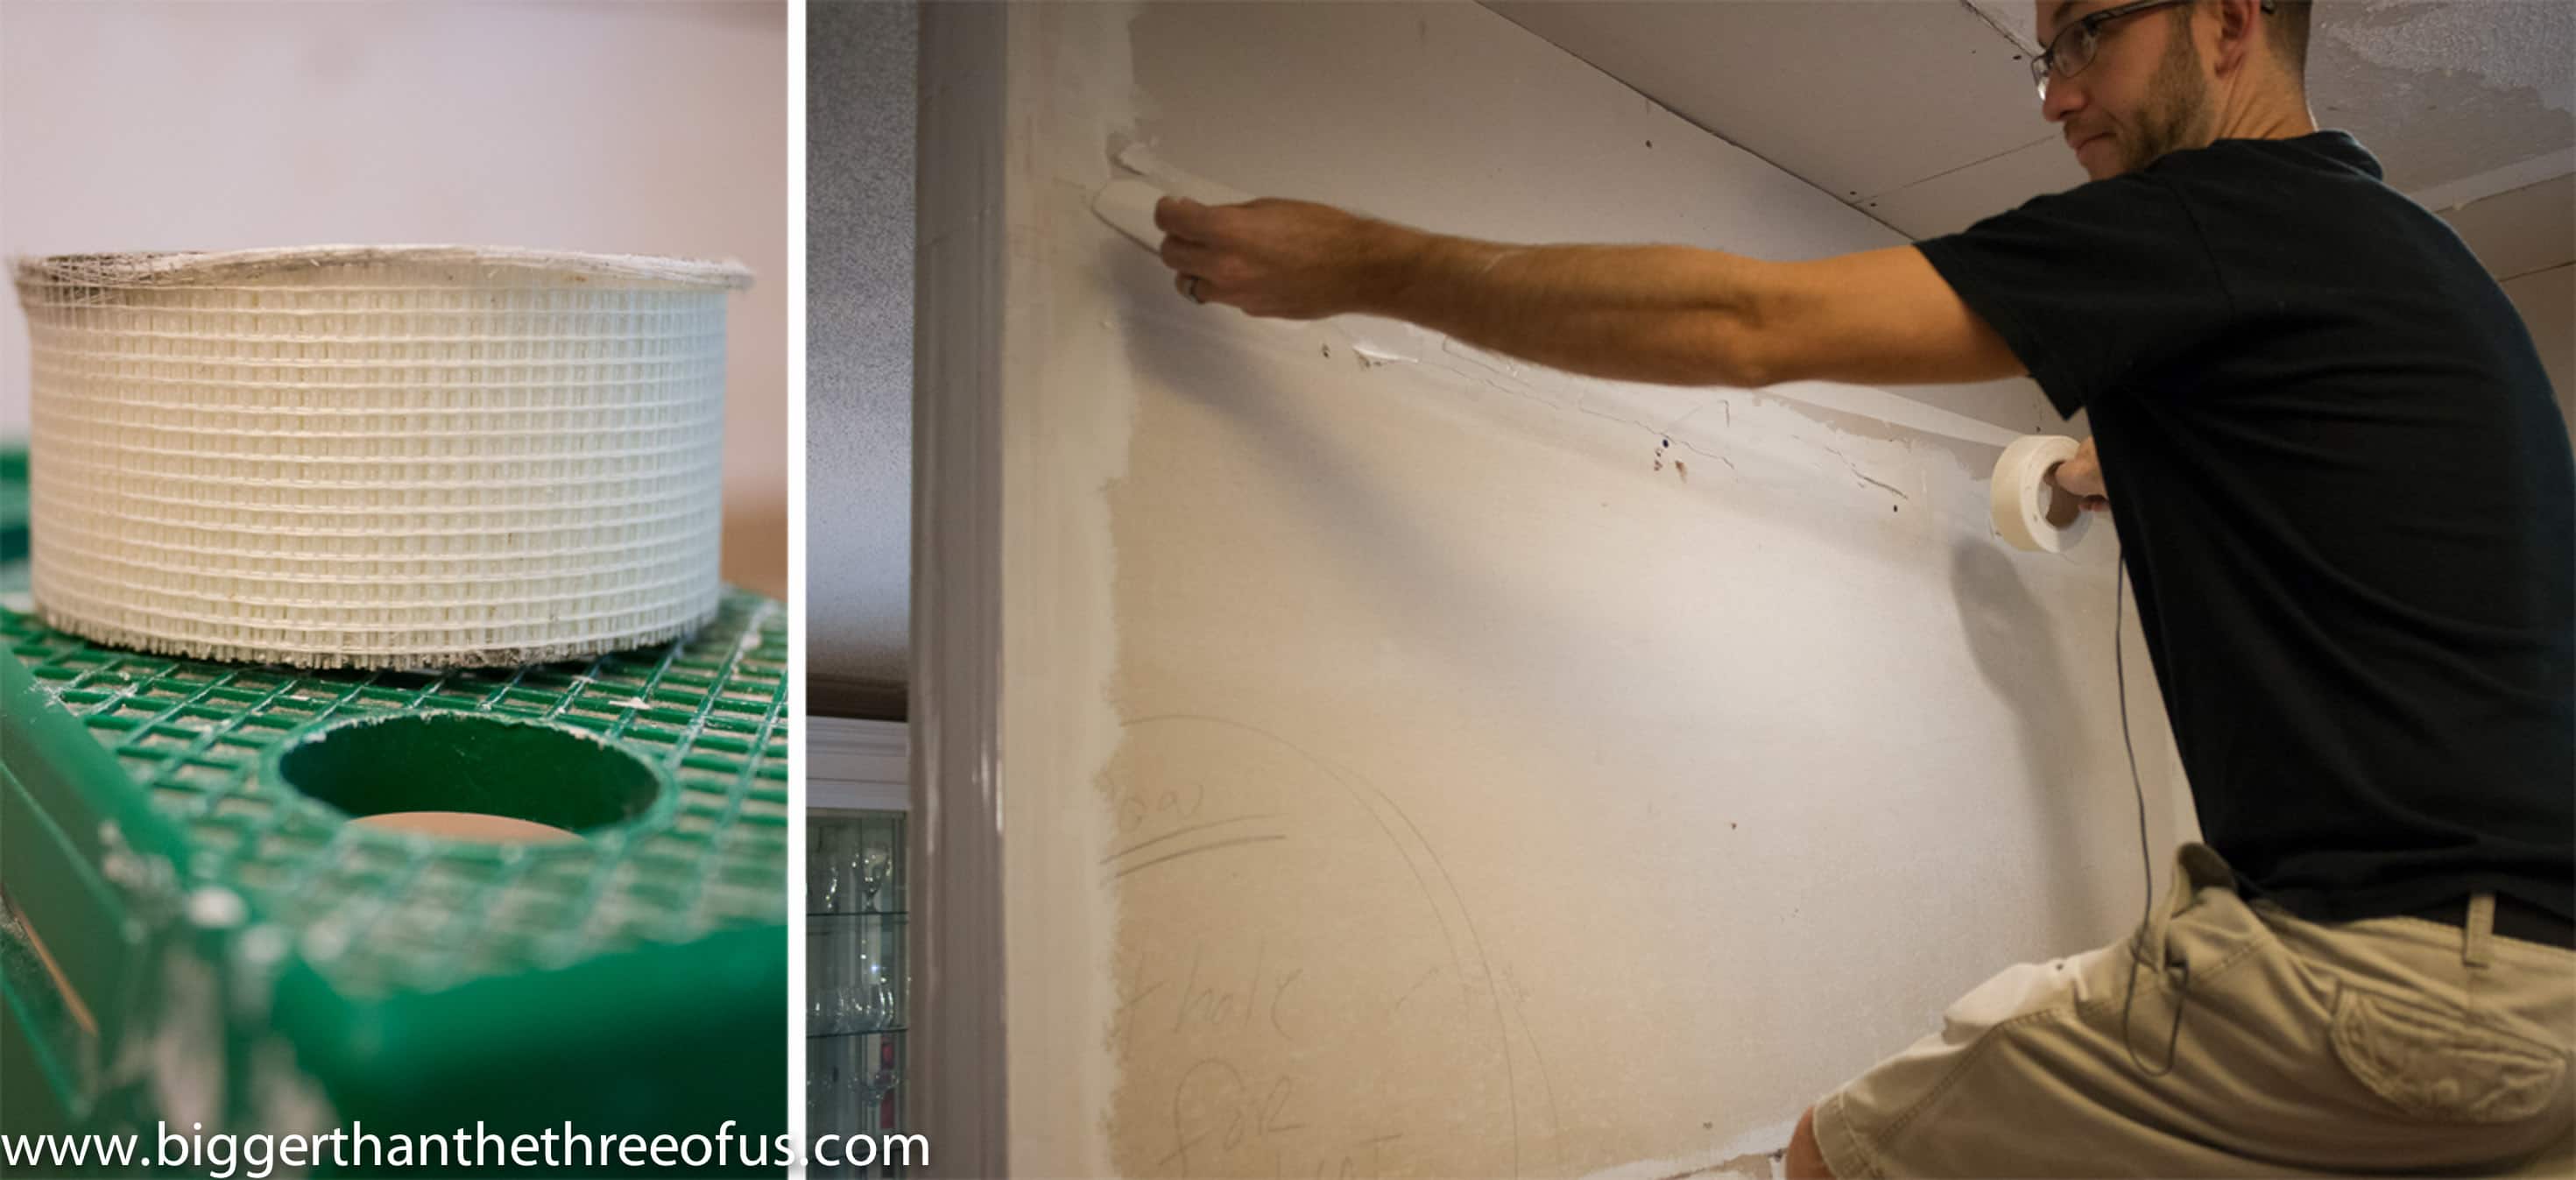 How to Mud Drywall - it's easier than you think! Full tutorial provided.